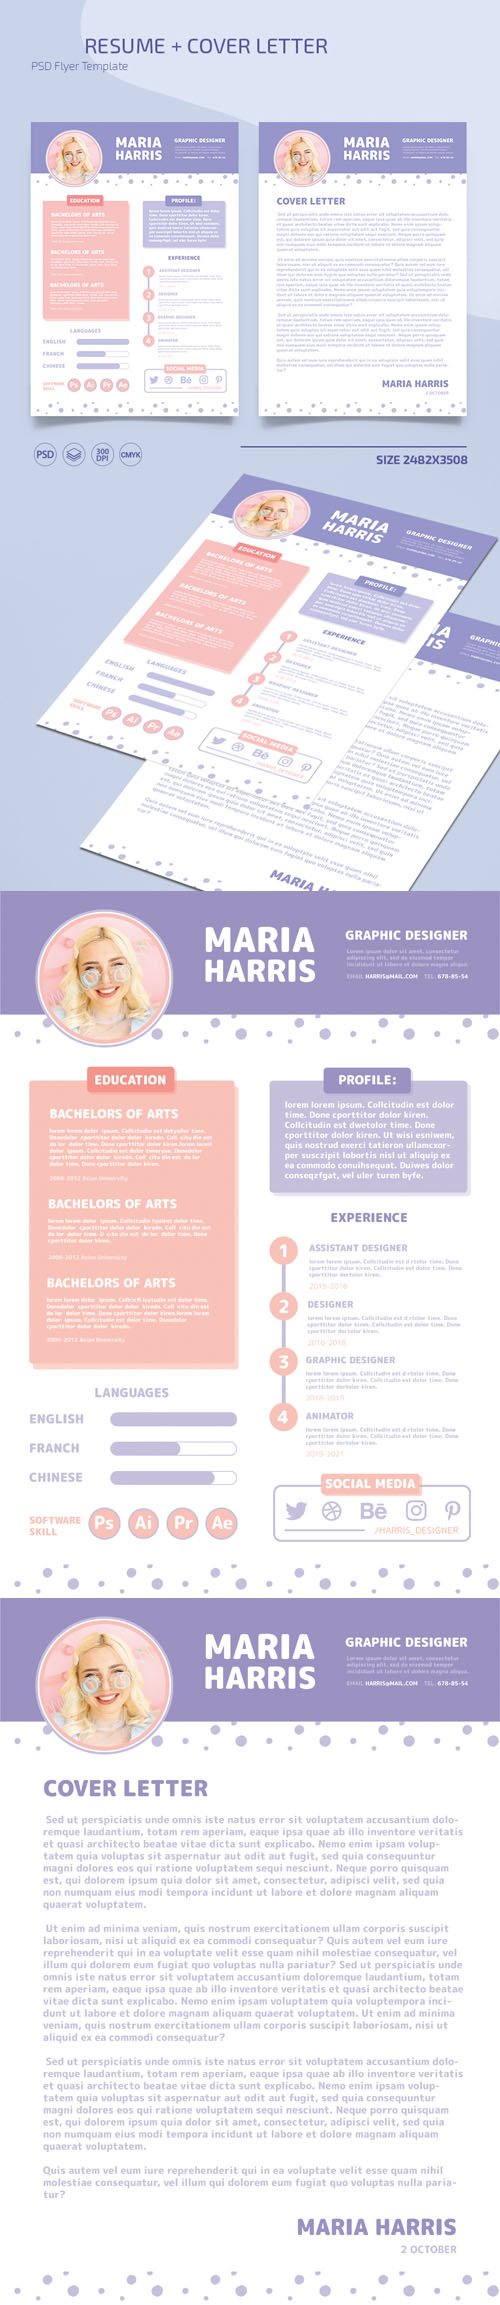 Cute Resume + Cover Letter PSD Templates